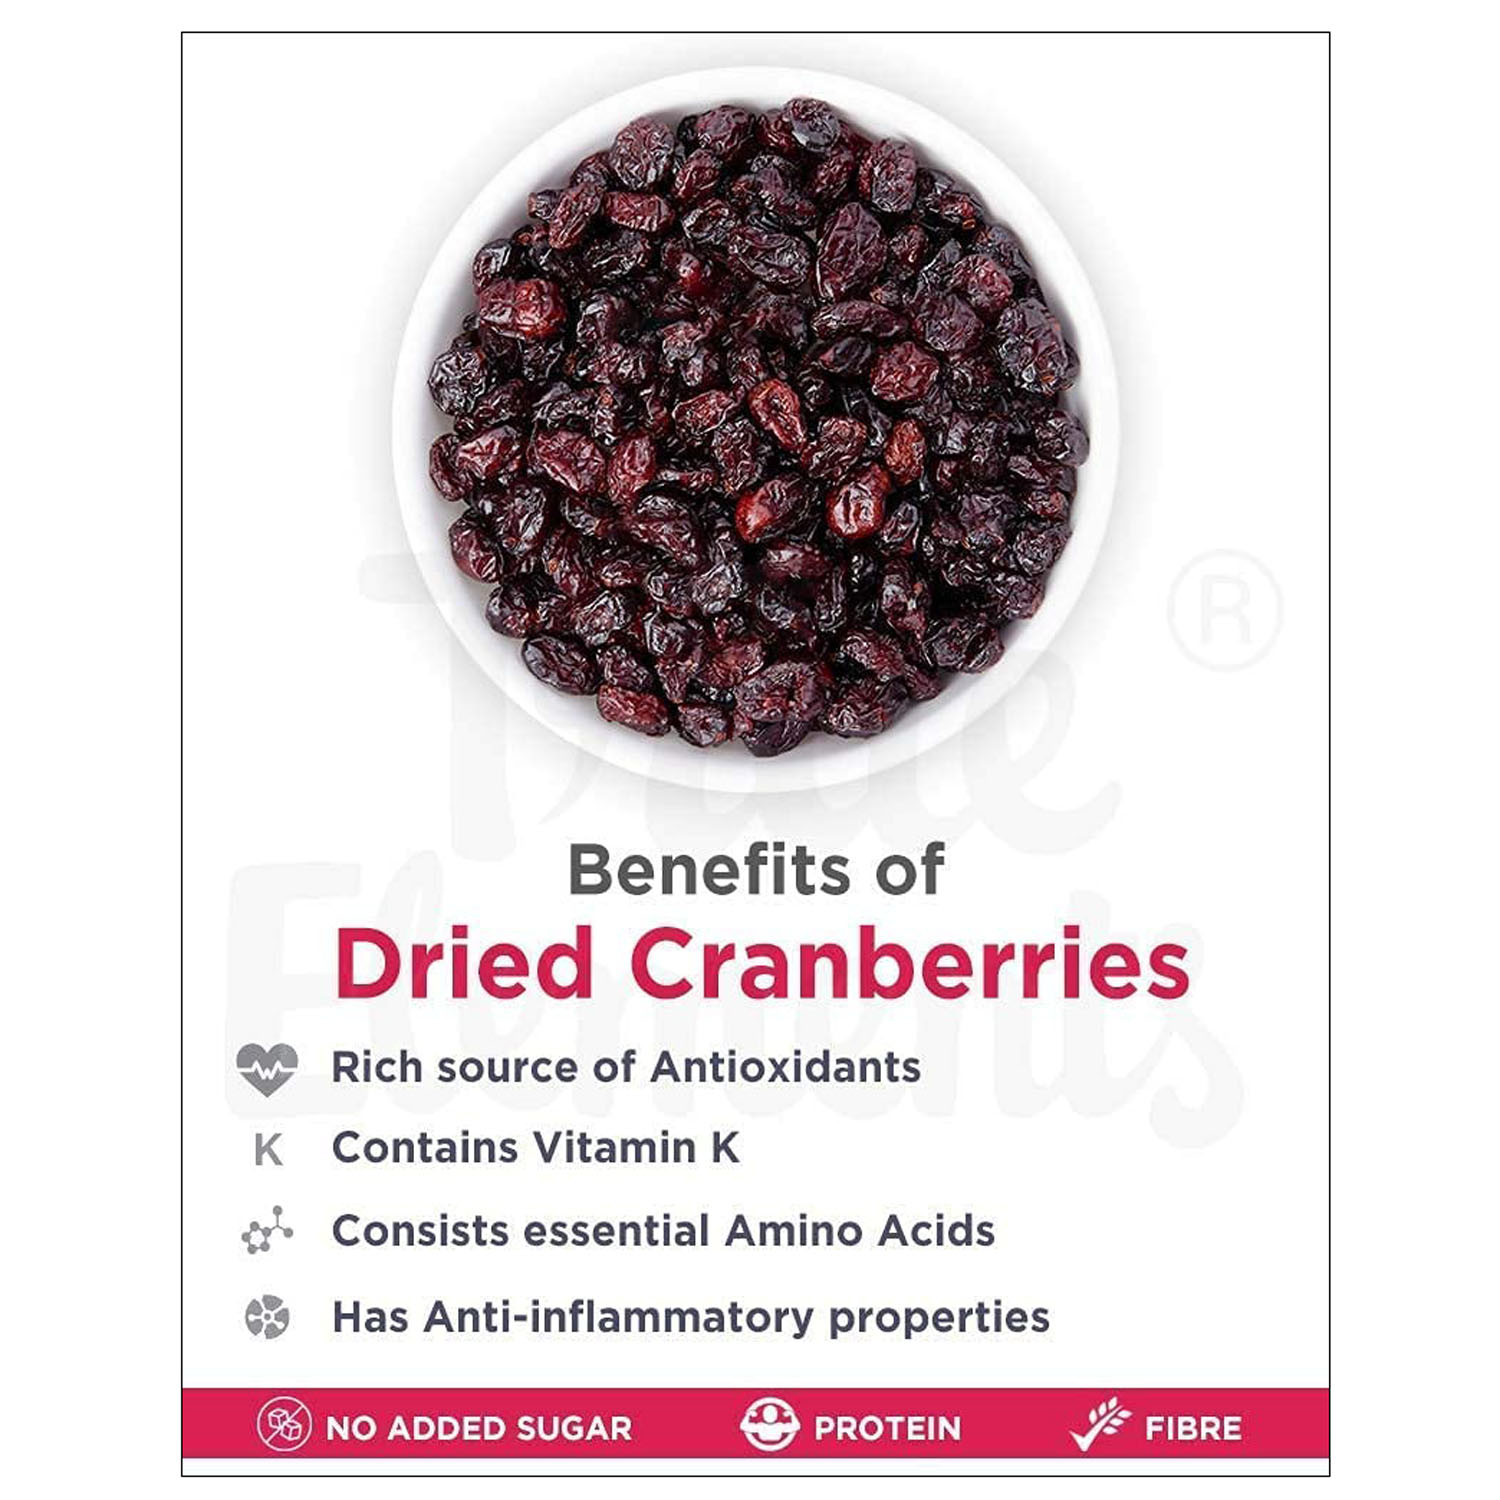 True Elements Dried Whole Cranberries, 125 gm, Pack of 1 